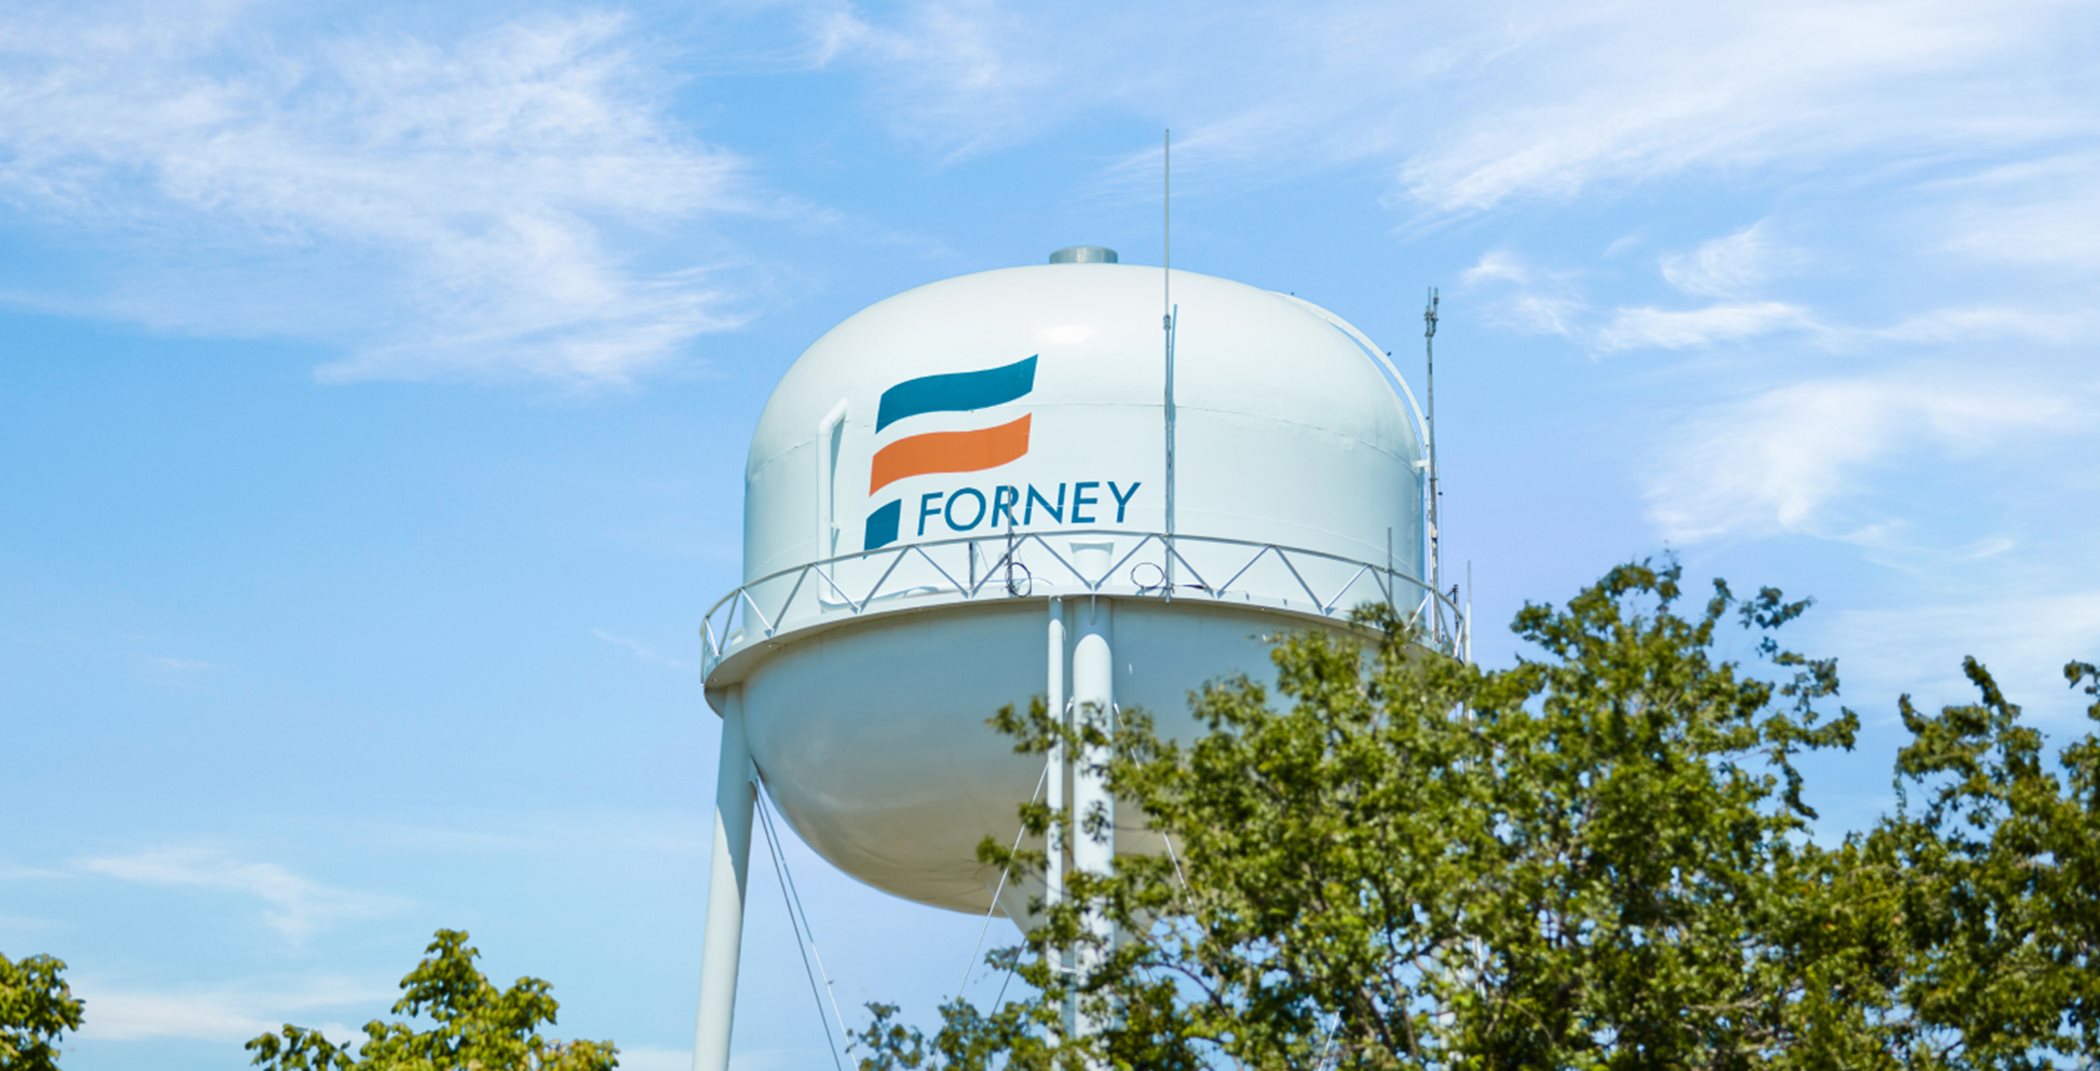 Forney referred to as the Antique Capital of Texas 